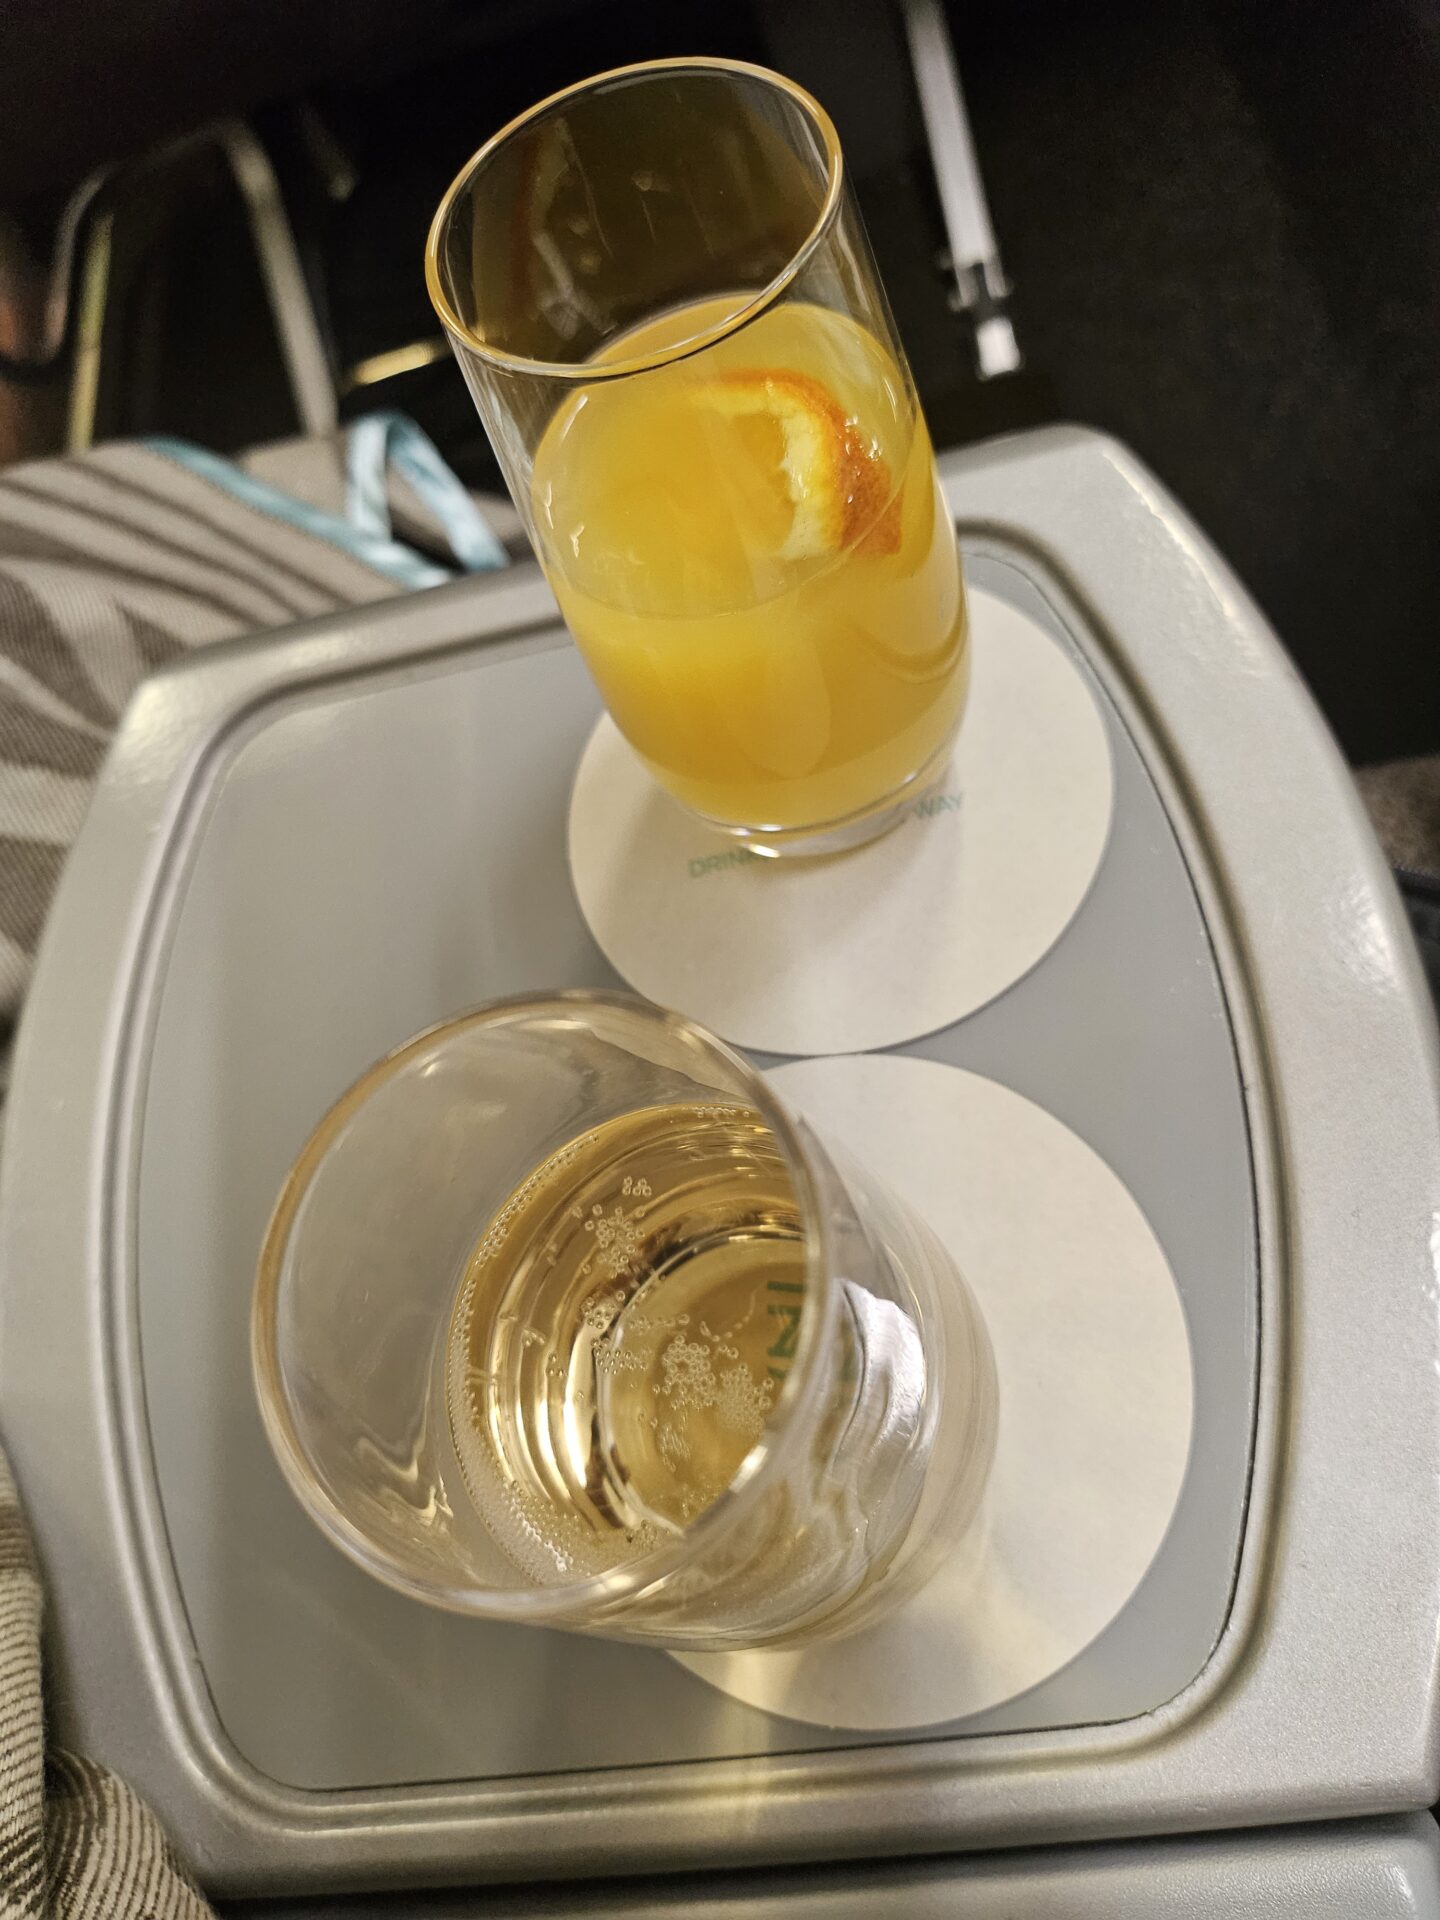 a glass of orange juice and a glass of liquid on a tray